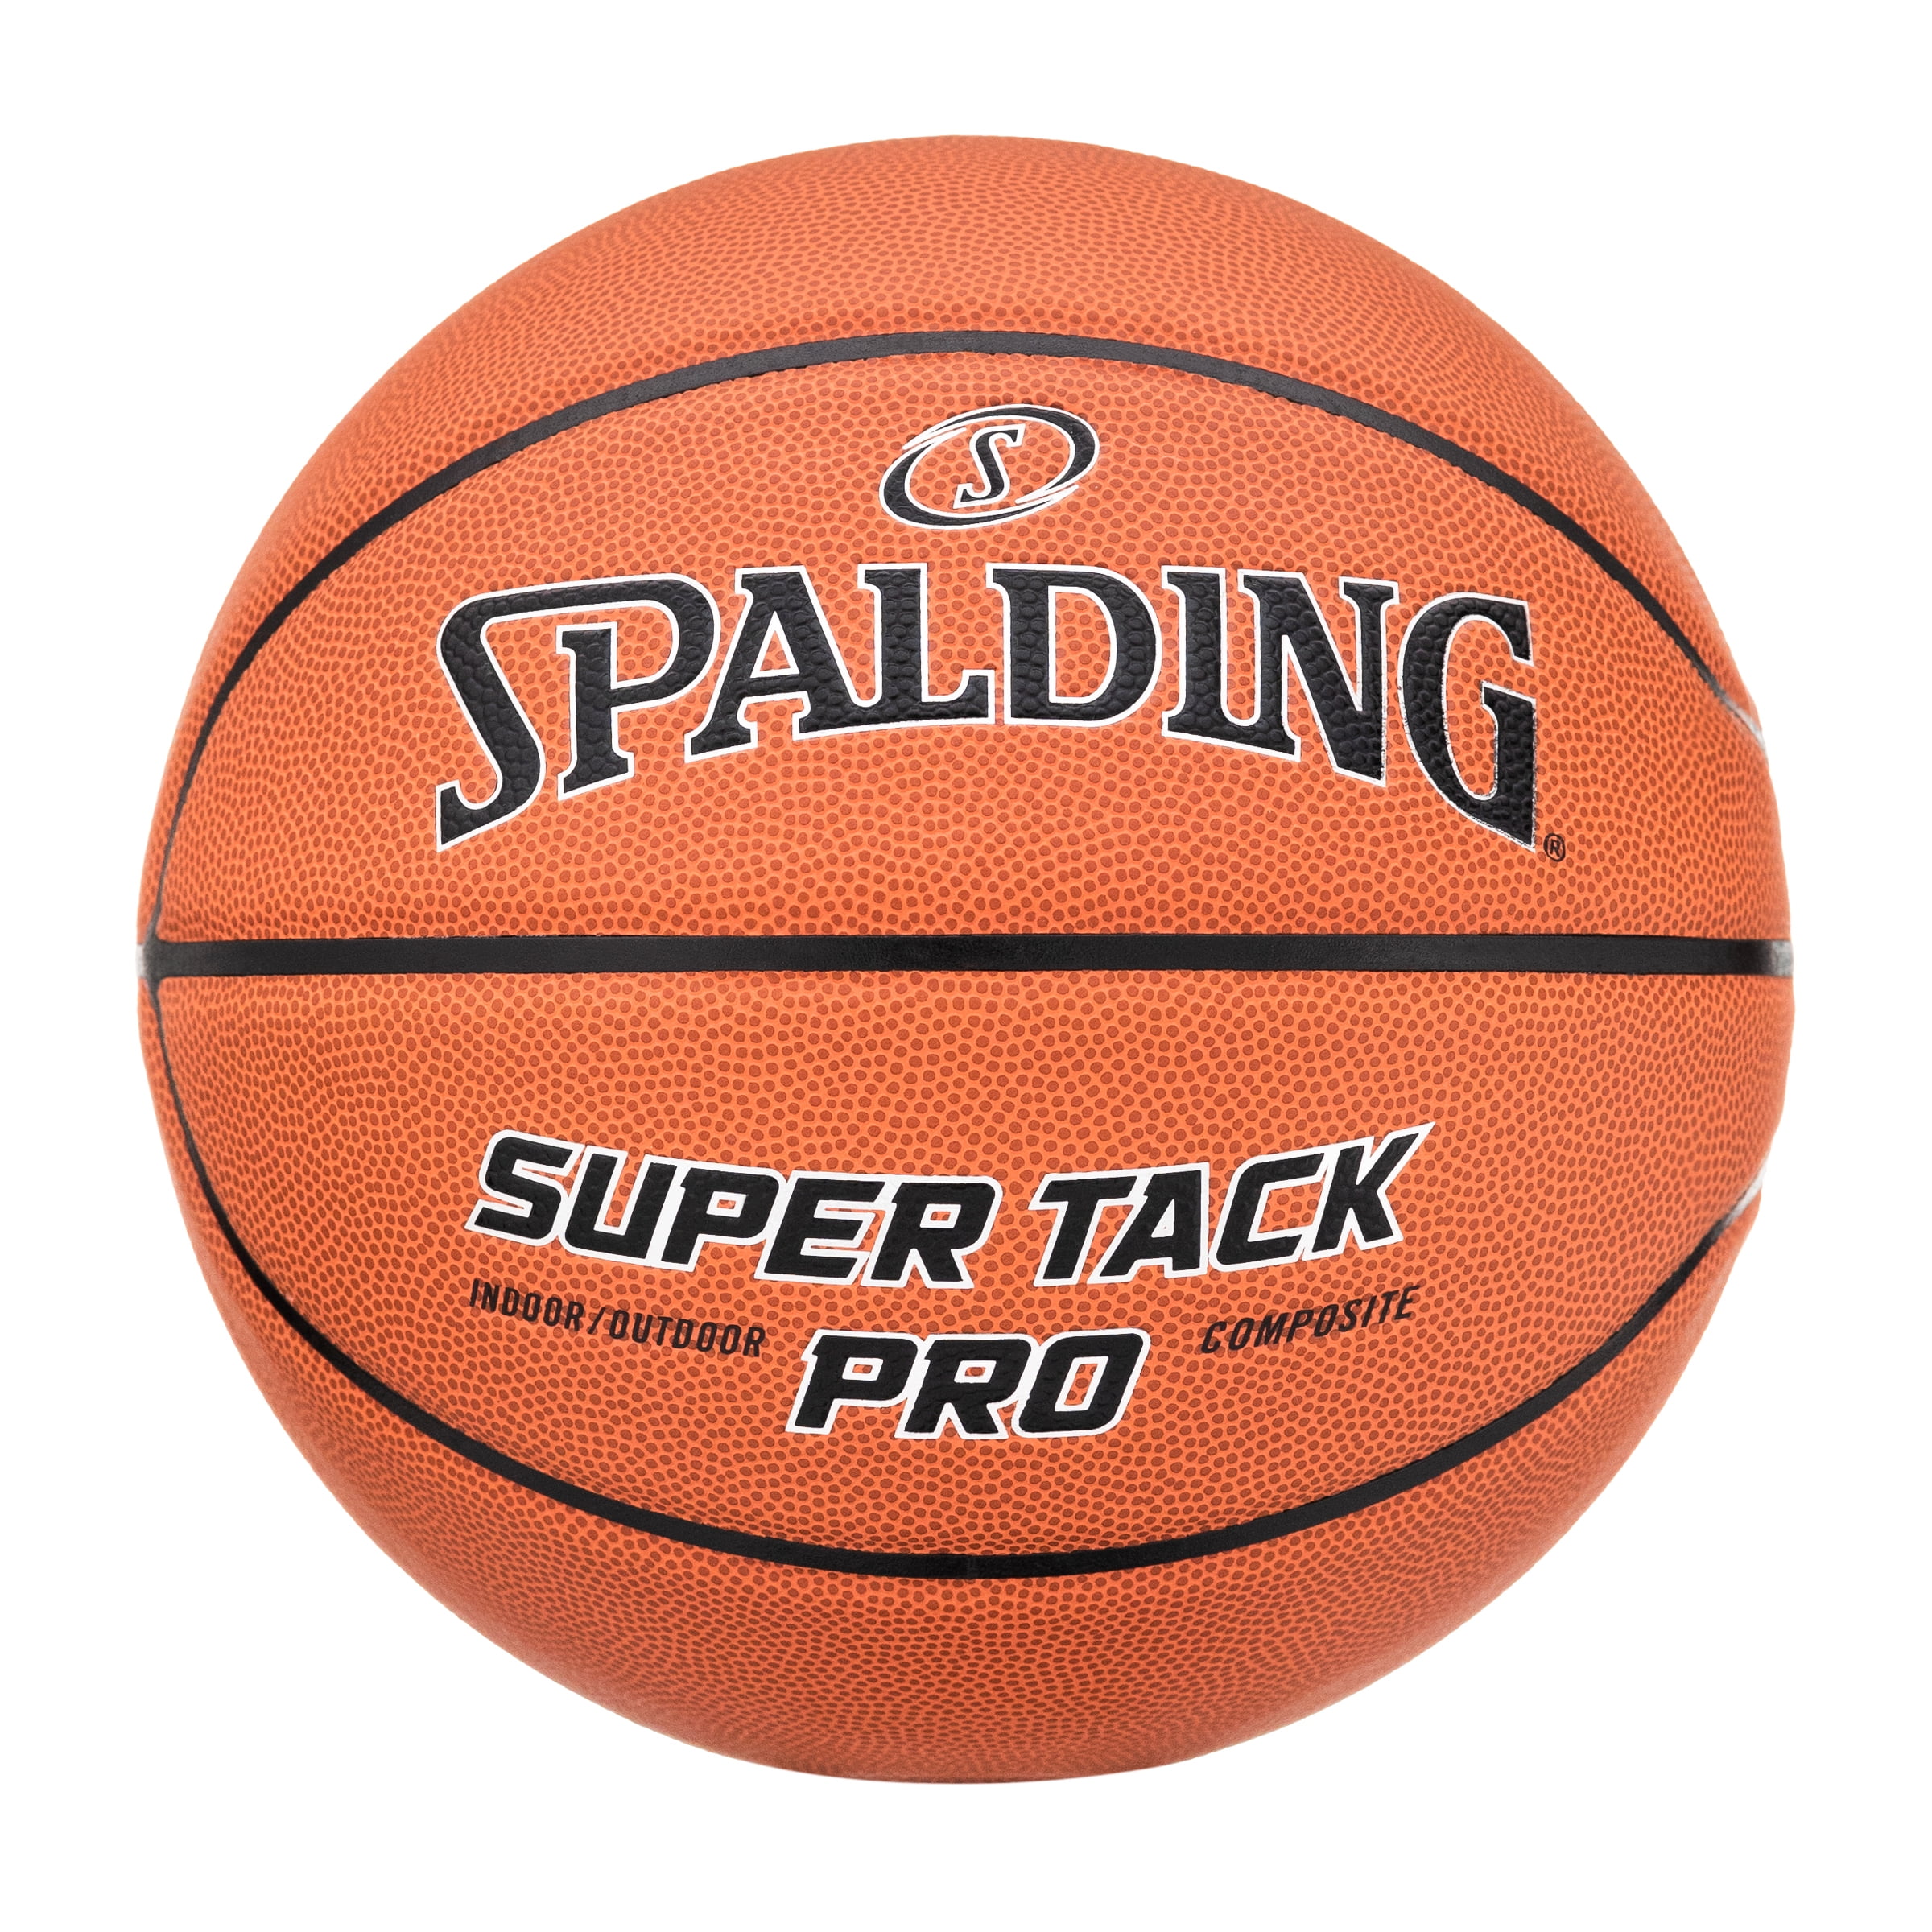 SuperTack Pro Indoor and Outdoor Basketball Play Sports Fun Kida Adult, 29.5 In.